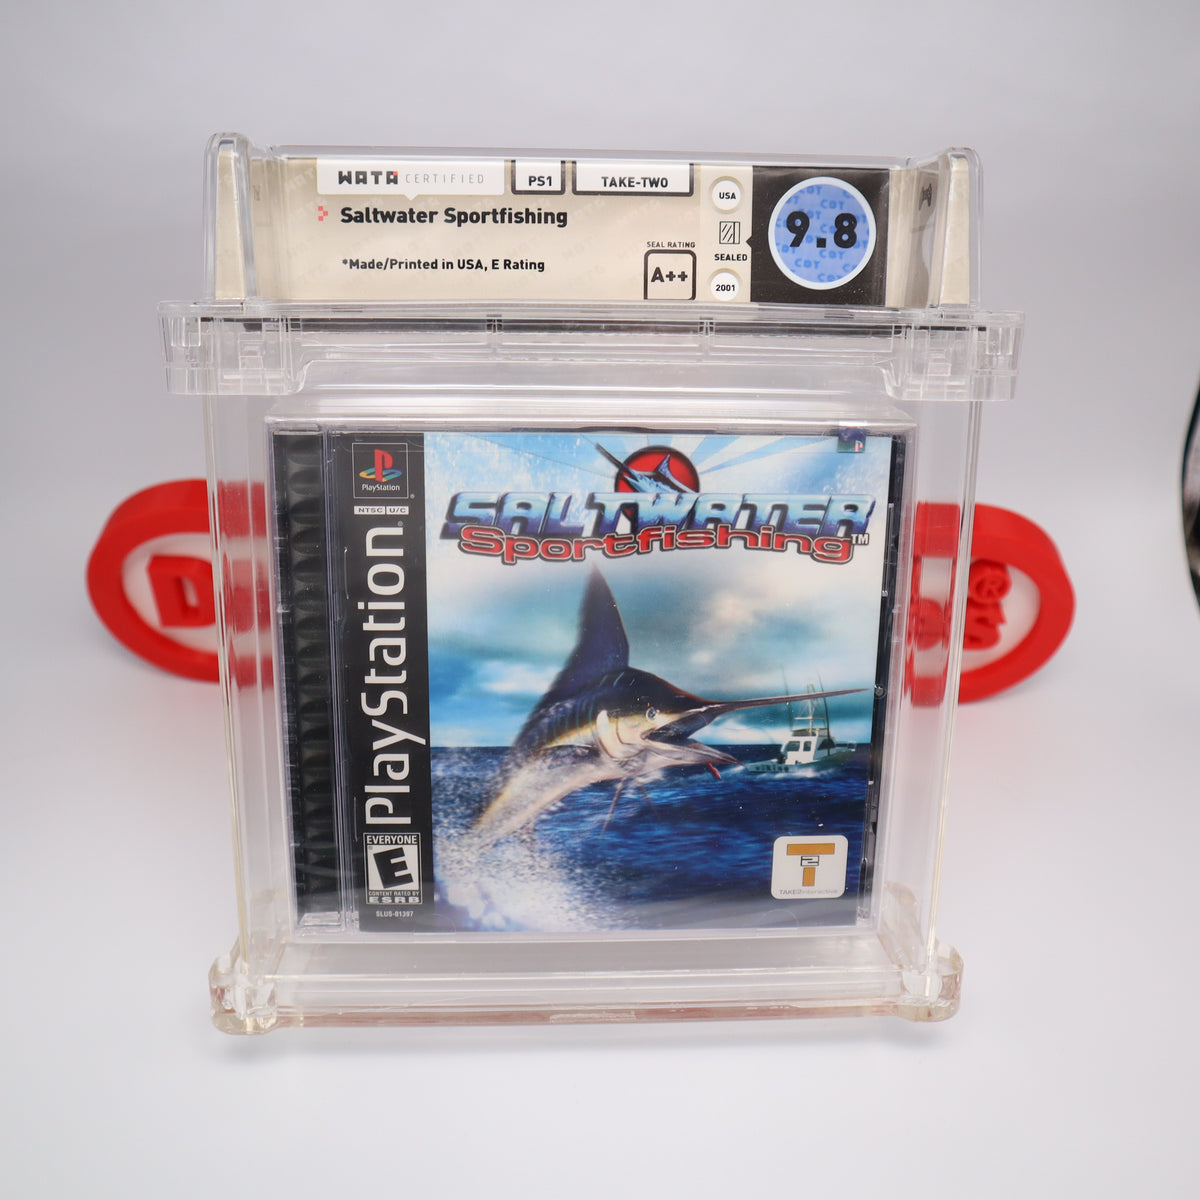 SALTWATER SPORTFISHING - NEW & Factory Sealed - Highest Score with